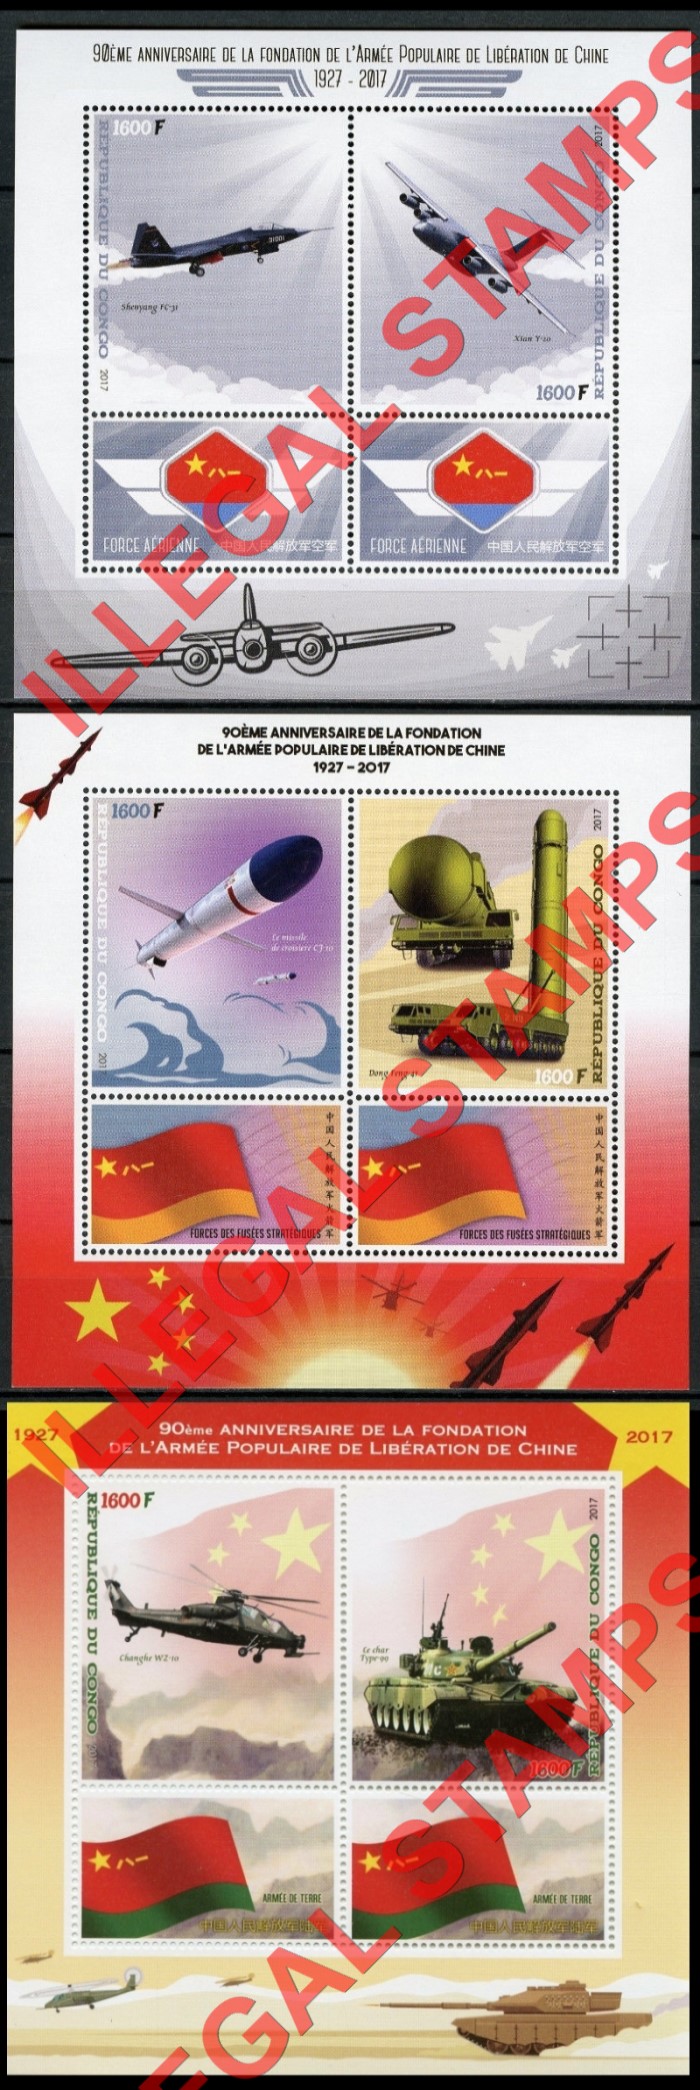 Congo Republic 2017 Chinese Liberation Army Illegal Stamp Souvenir Sheets of 2 (Part 2)